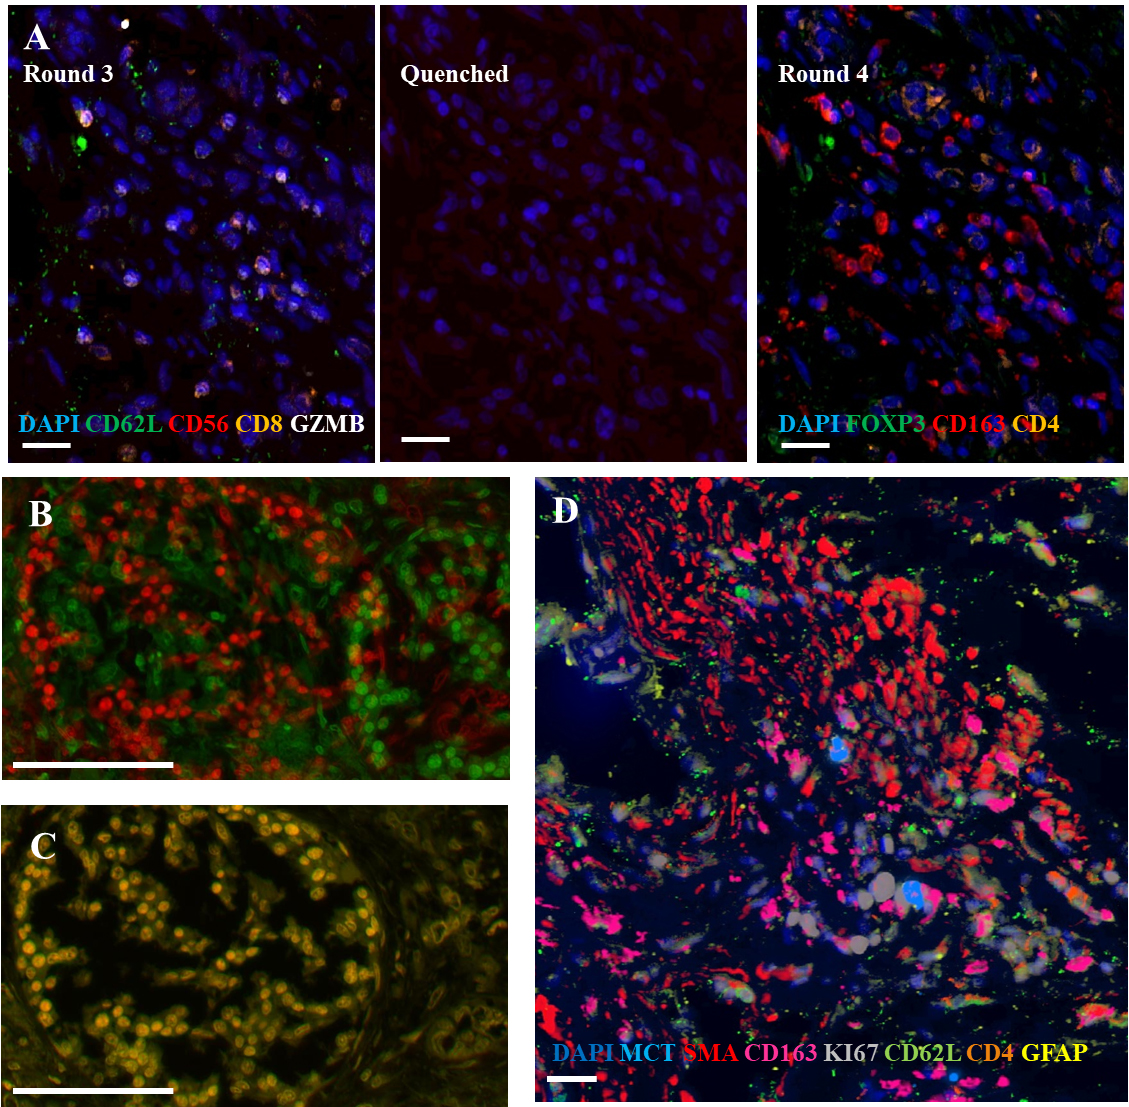 Representative images from cyclic multiplexed-immunofluorescence (MxIF) labeling of a primary PDAC tumor with image registration. A) Images showing distinct marker distributions in the same area across staining round 3, quenching and re-scanning at the same intensity, and re-staining round 4. Scale bar = 20 μm. B) Unaligned image of DAPI staining of the same area from round 1 (green) and 9 (red) . C) Alignment (overlaid yellow) of round 1 and 9 DAPI using image registration software. Scale bar = 100 μm. D) Aligned composite image showing a subset of markers from different rounds of the MxIF panel. Scale bar = 20 μm.